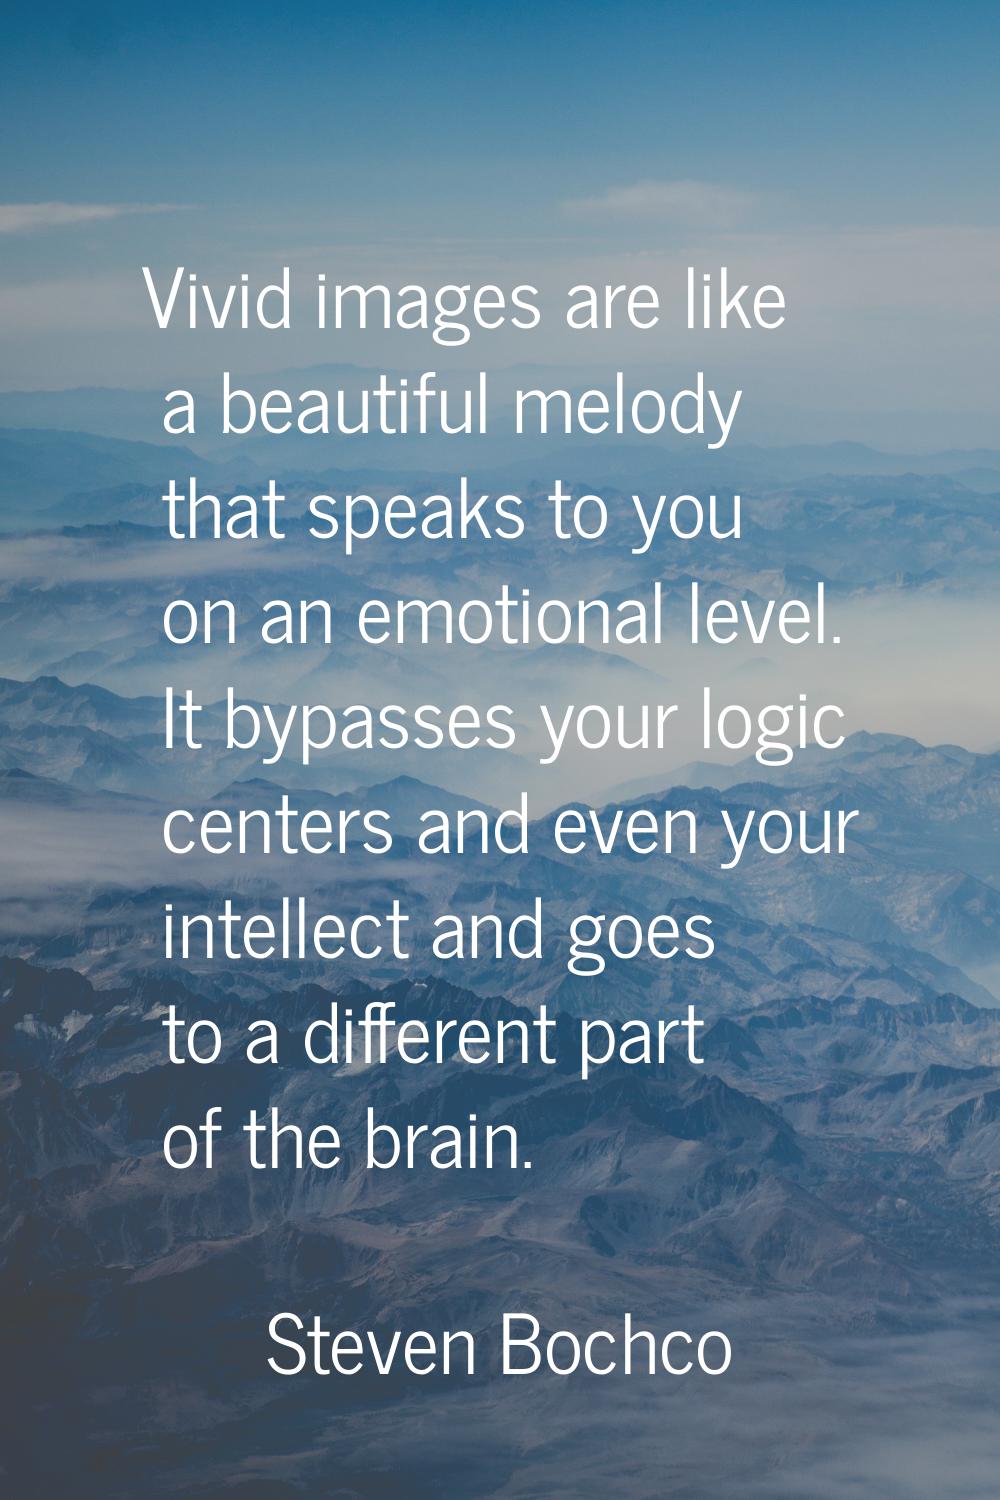 Vivid images are like a beautiful melody that speaks to you on an emotional level. It bypasses your